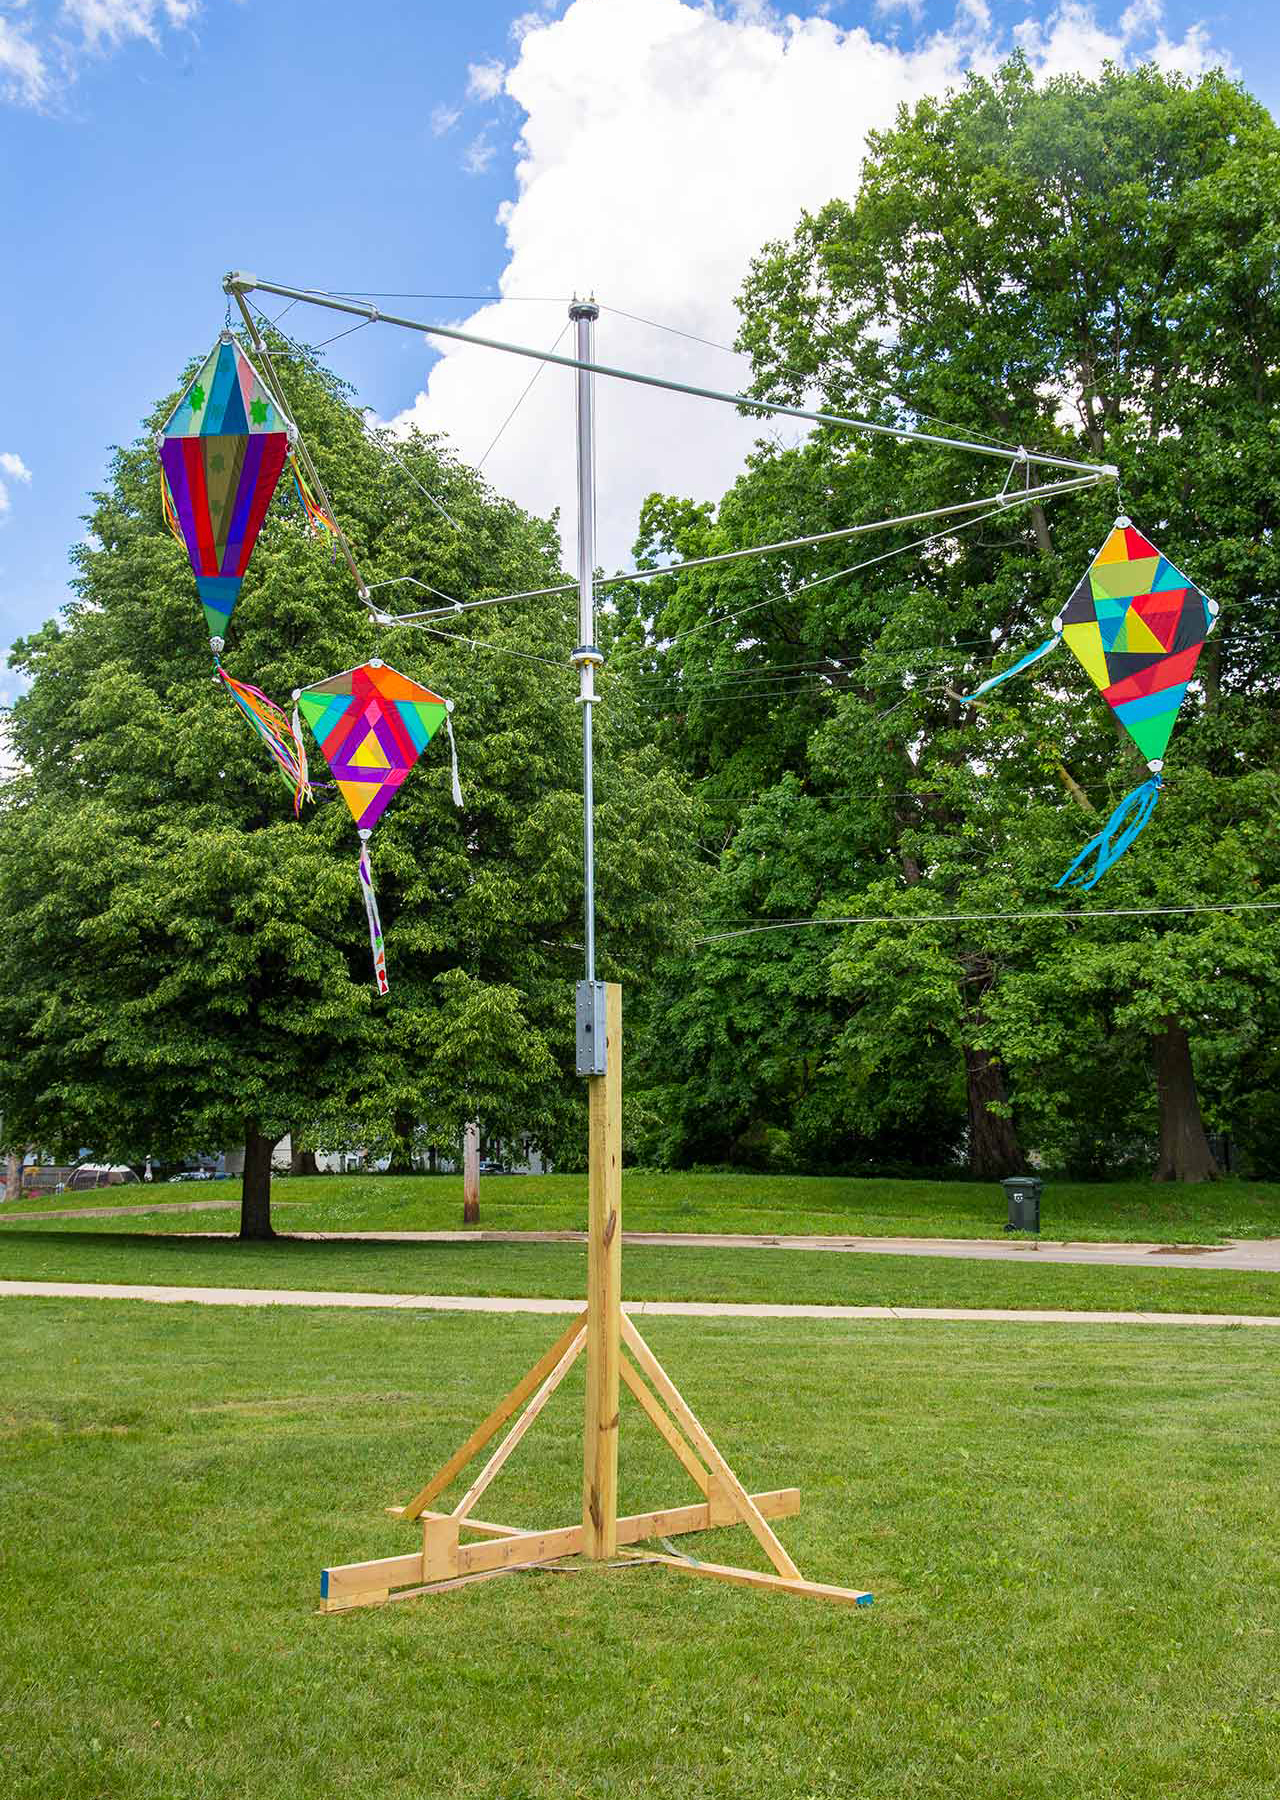 Full view of the last kites artwork, the metal frame is fixed to a wooden base